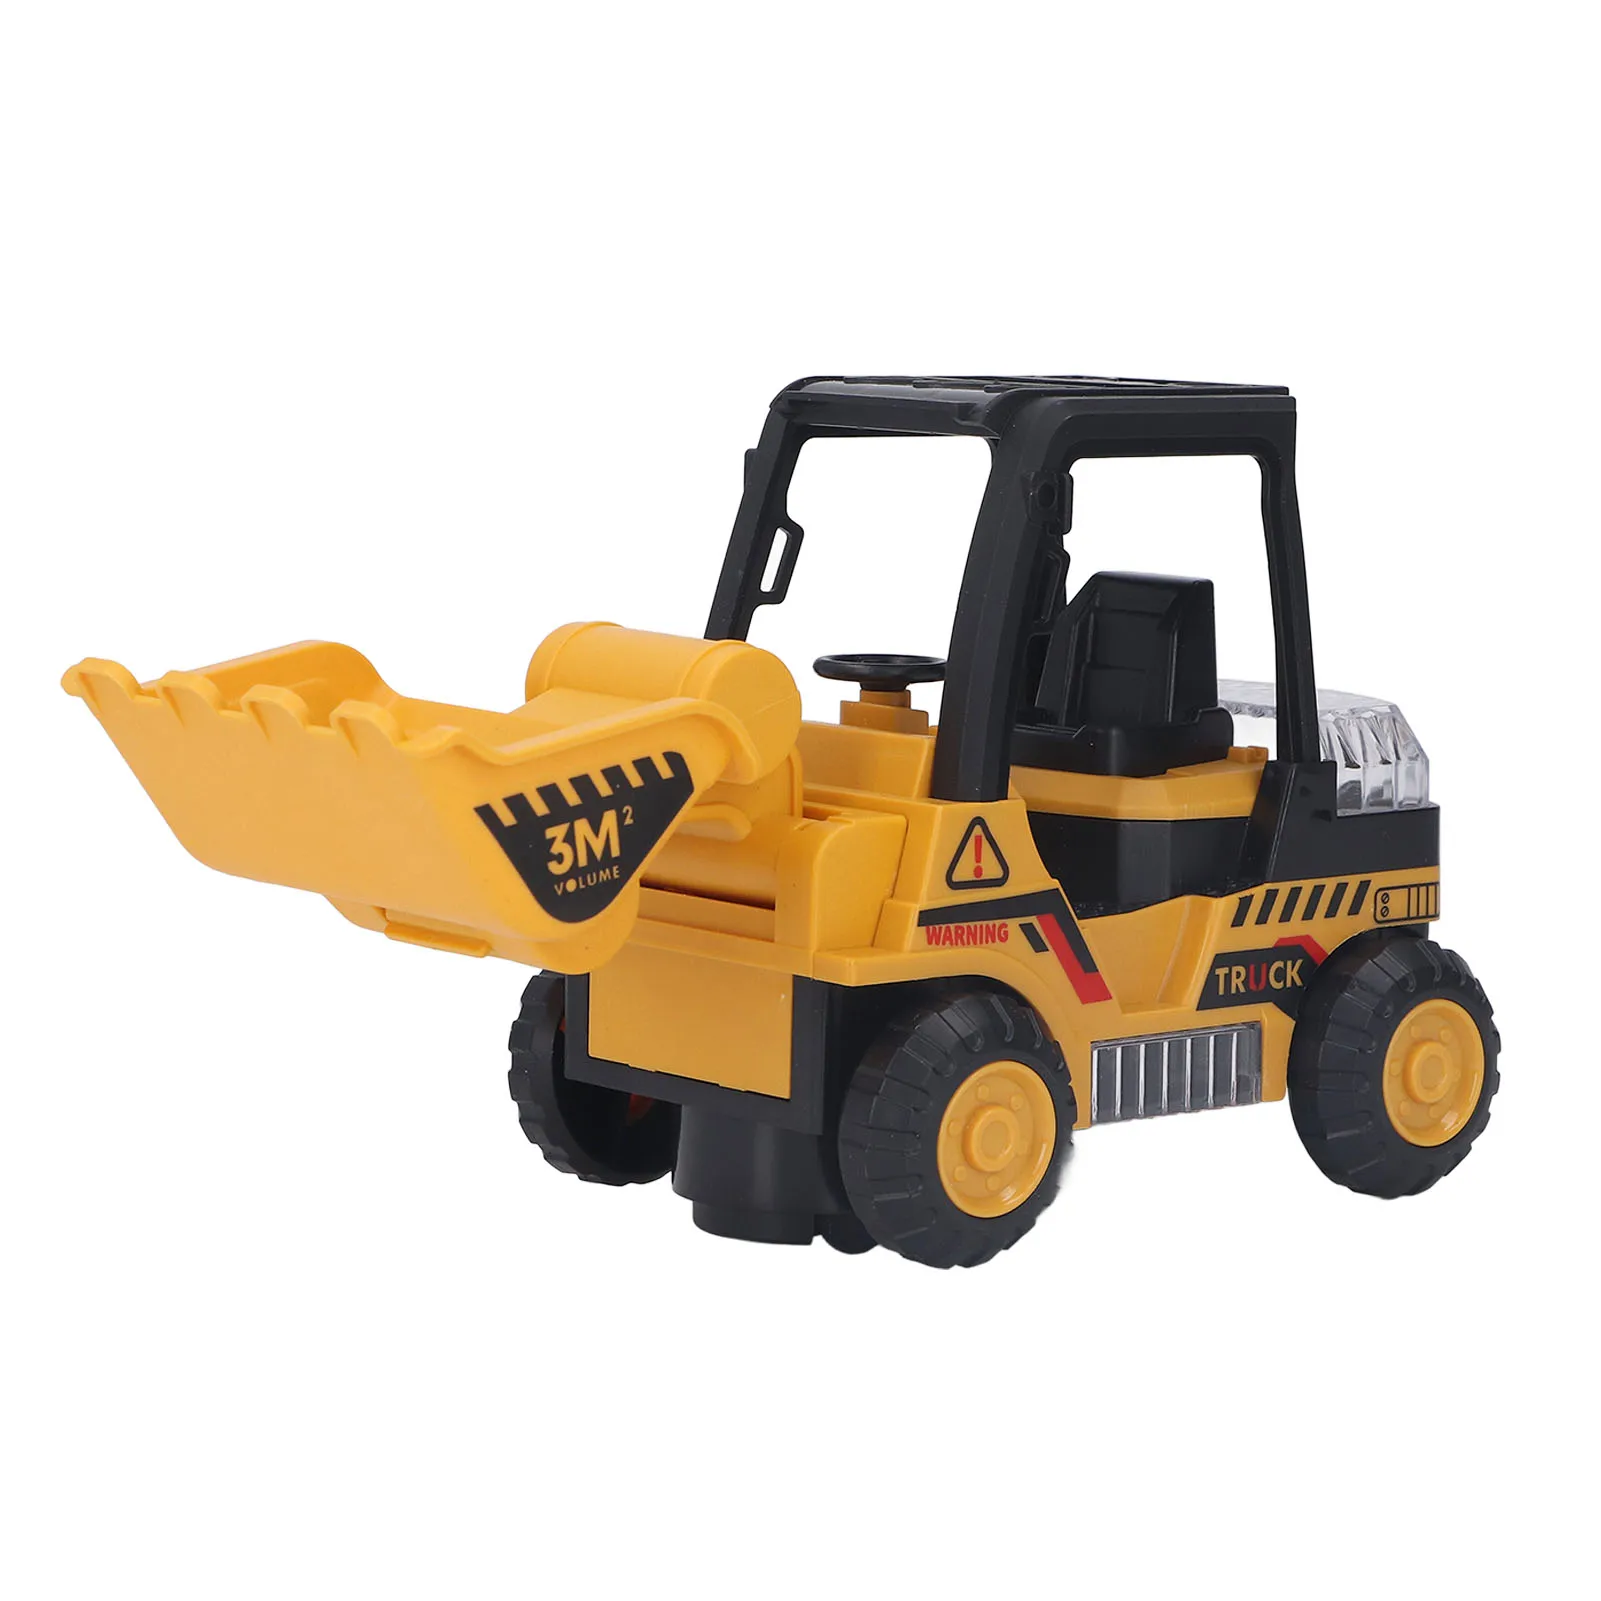 Electric Excavator Toy Simulation Construction Excavator Model With Light And Sound Gift For Kids 1 32 diecasts toy pull back car metal alloy horses muscle vehicle model with sound